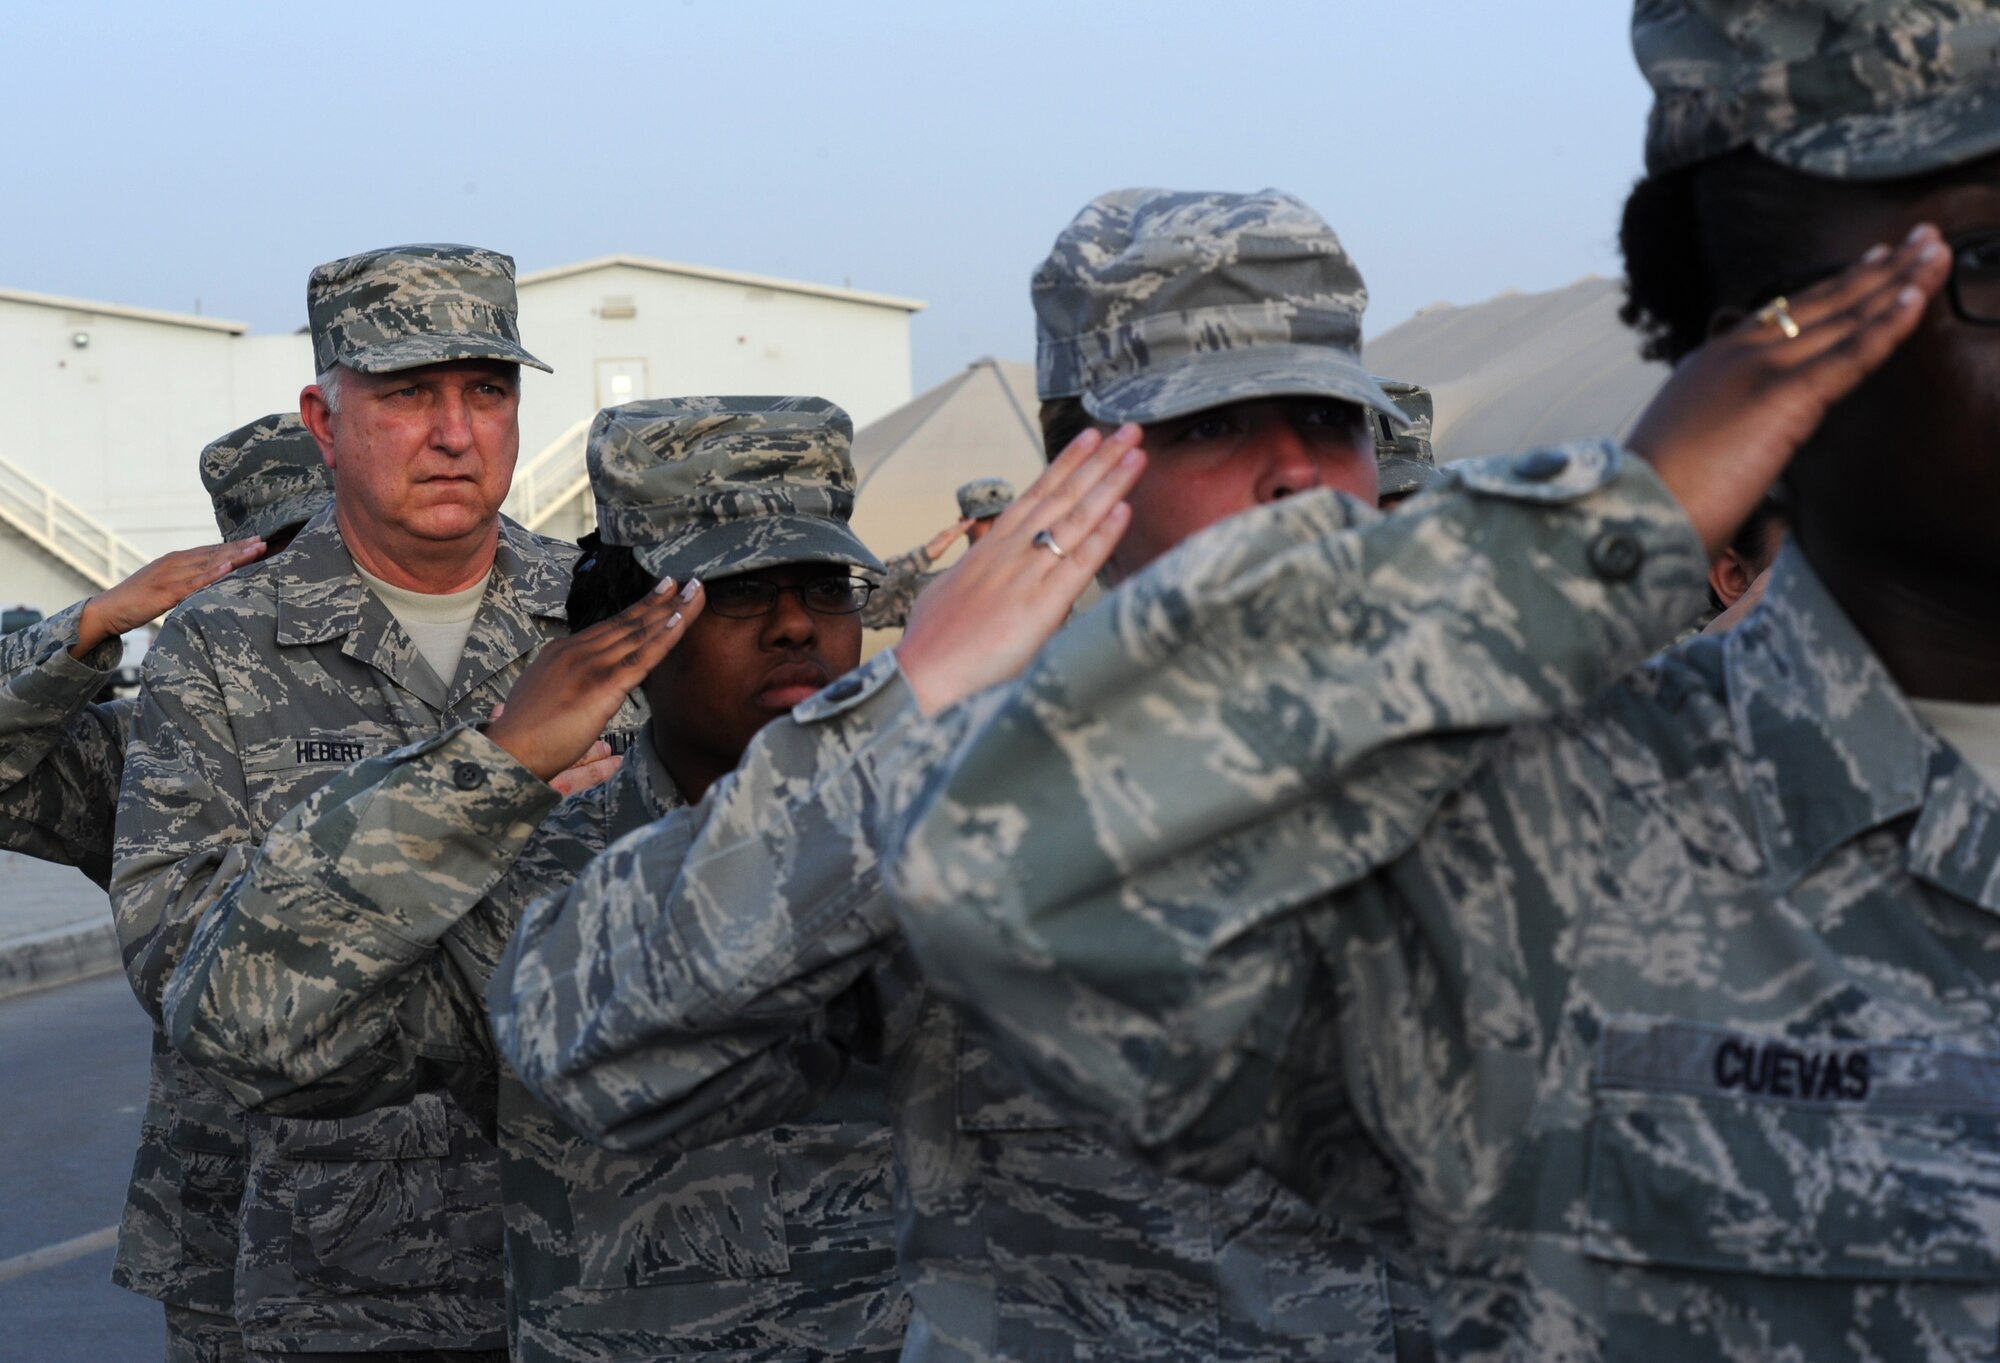 SOUTHWEST ASIA - Mitch Hebert takes part in the weekly retreat ceremony at the 380th Air Expeditionary Wing April 27, 2012. Hebert, the deputy commander of the 380th Expeditionary Force Support Squadron, is on the first deployment of his 31-year career as a civil servant. The Biloxi, Miss., native has held a variety of Air Force Services positions at bases all over the world, but deploying with Airmen to Southwest Asia has long been a career goal for him. (U.S. Air Force photo/Staff Sgt. J.G. Buzanowski)